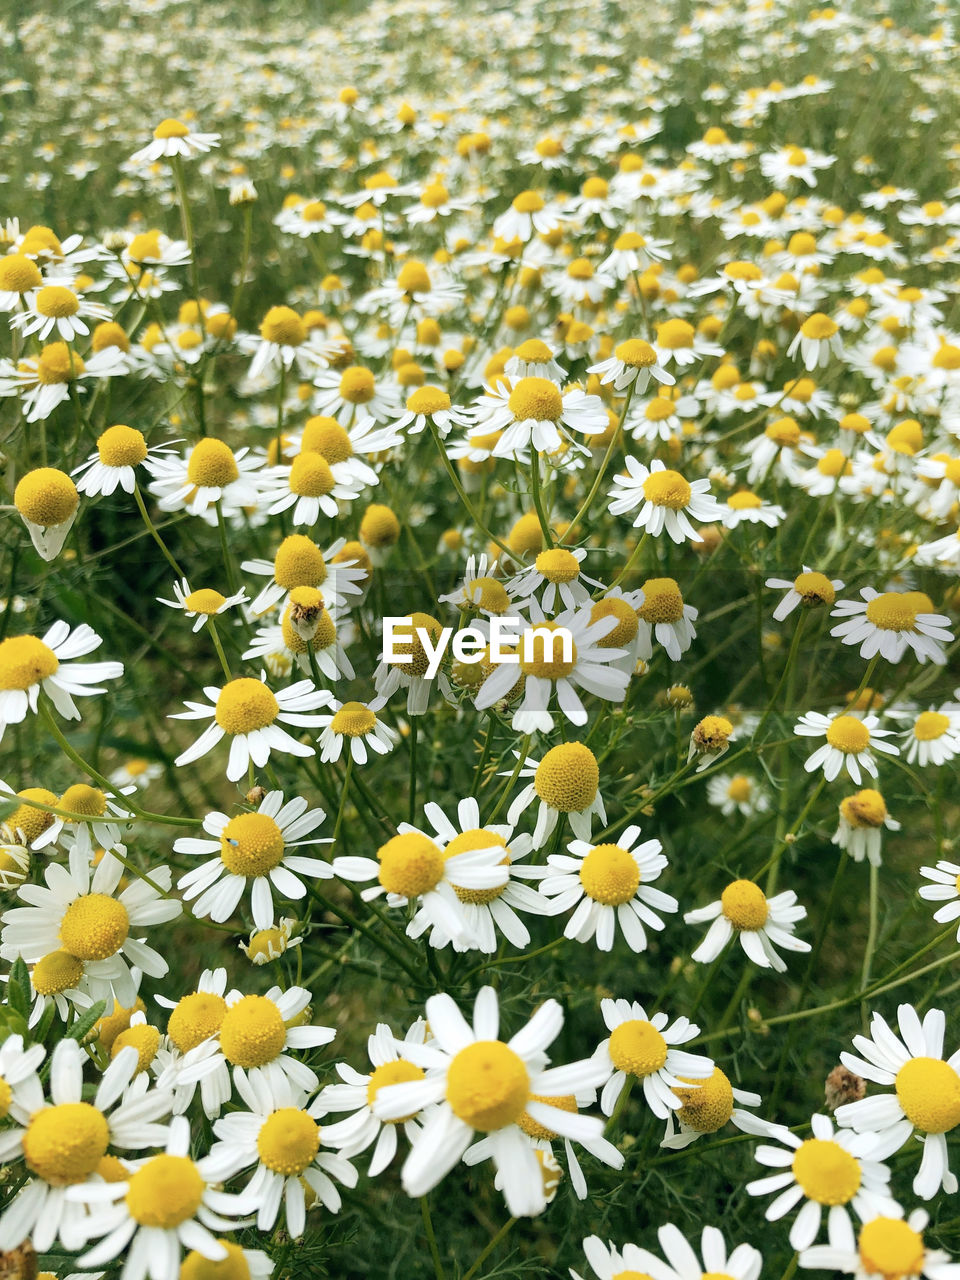 flower, flowering plant, plant, freshness, beauty in nature, fragility, growth, yellow, flower head, petal, inflorescence, nature, field, meadow, no people, land, close-up, springtime, day, white, wildflower, high angle view, abundance, daisy, outdoors, grass, flowerbed, backgrounds, blossom, botany, full frame